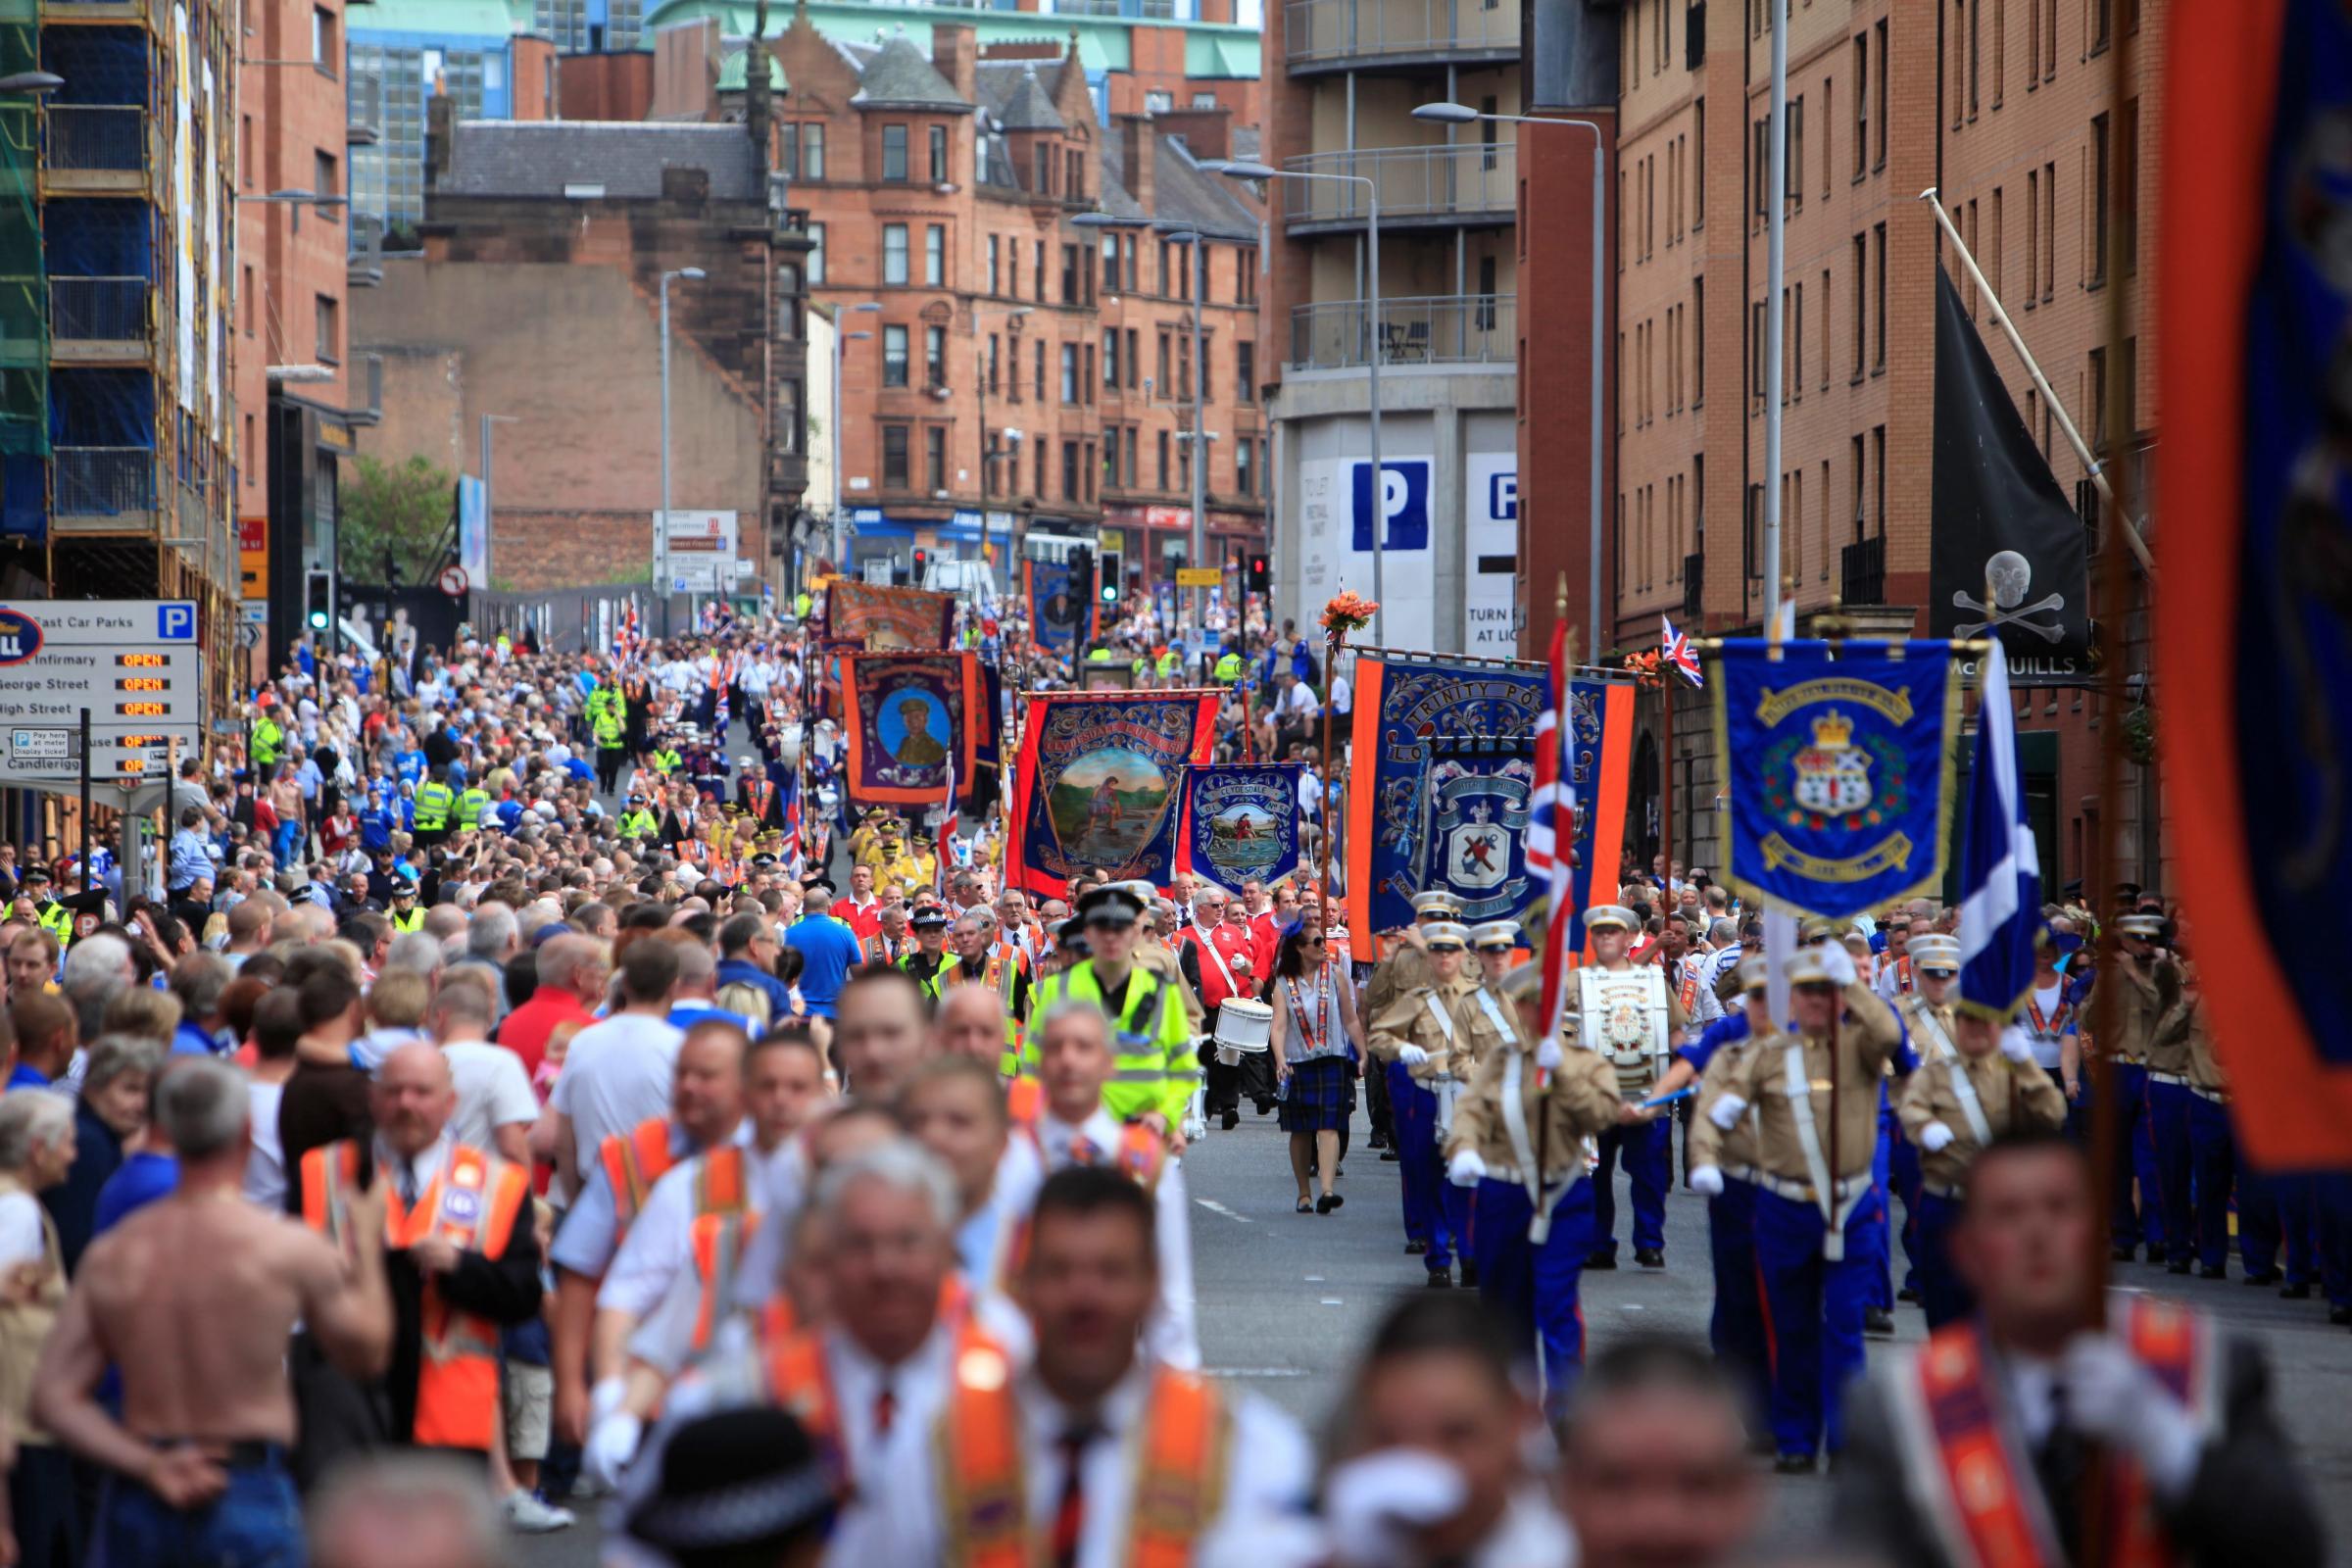 More Orange lodges request parades in July as marches permitted again